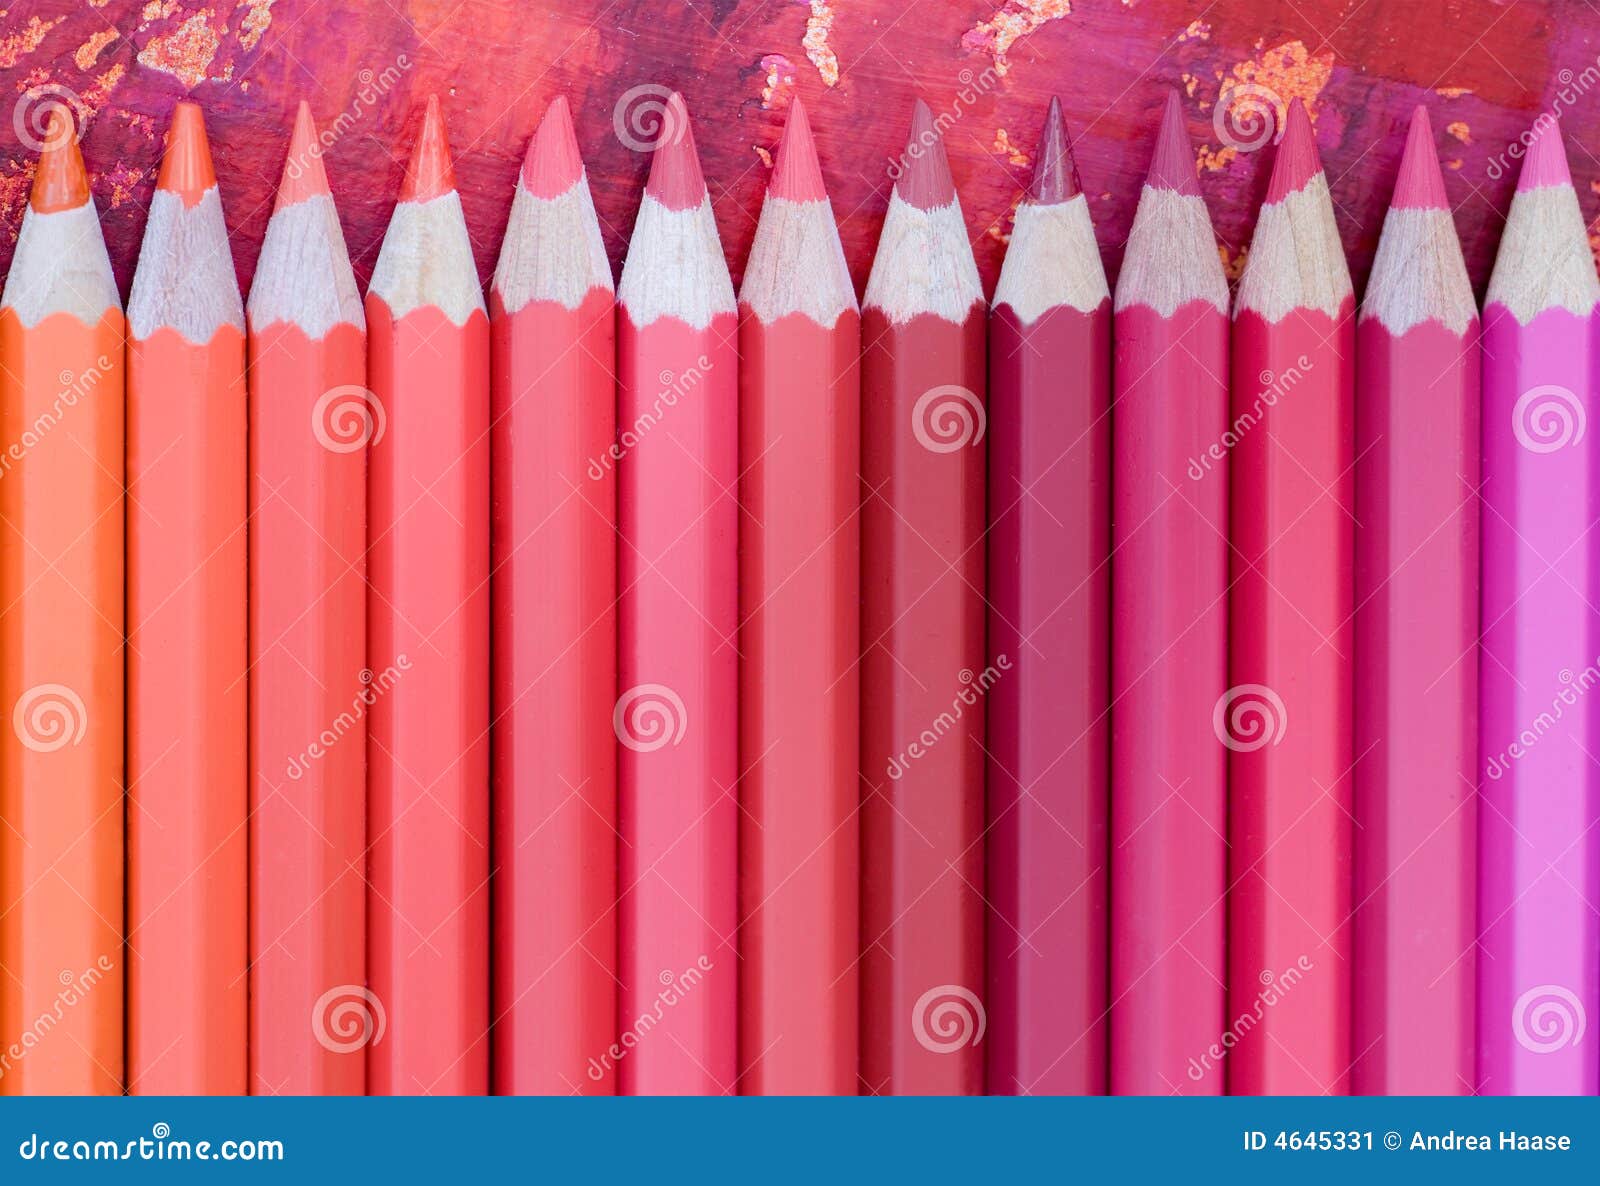 All Shades Of Pencil